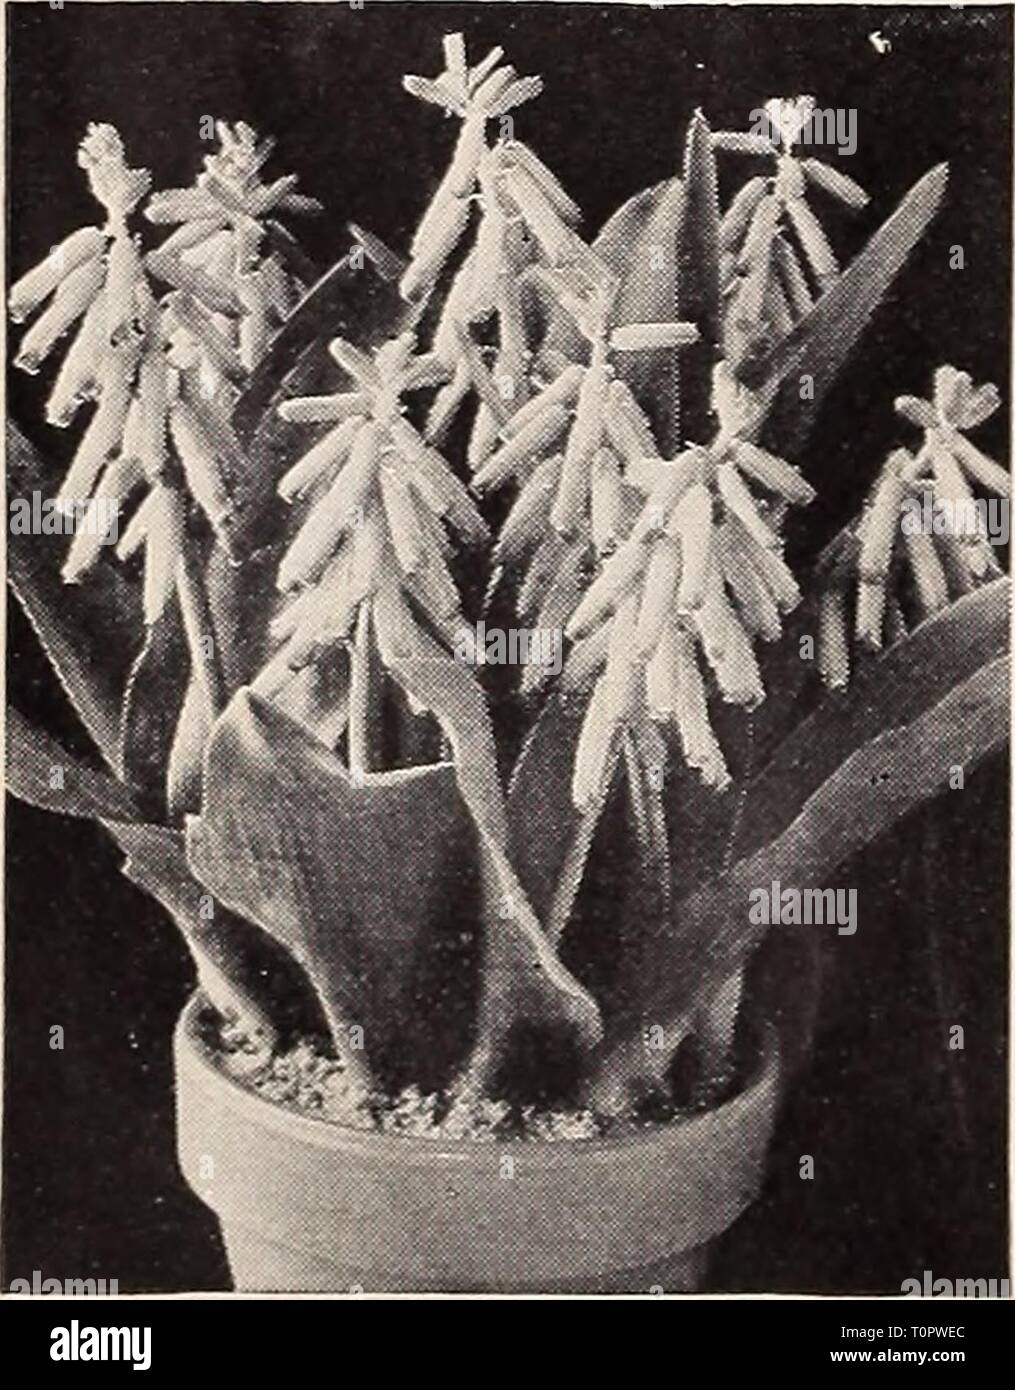 Dreer's autumn planting guide for Dreer's autumn planting guide for 1940  dreersautumnplan1940henr Year: 1940  Ixia—African Corn Lily 40-530 Ixia—African Corn Lily These are half-hardy bulbs from the Cape of Good Hope. They are primarily for indoor culture but will do equally well in a well-drained cold frame outdoors. The flowers are of the most brilliant rich and varied hues including yellow, pink, carmine, orange, red, blue, scarlet, and white. Jumbo Bulbs: 3 for 15c; 12 for 50c; 25 for 85c; 100 for §3.25.    Lachenalia pendula superba Lachenalia Cape Cowslip 40-535 Pendula superba. An inte Stock Photo